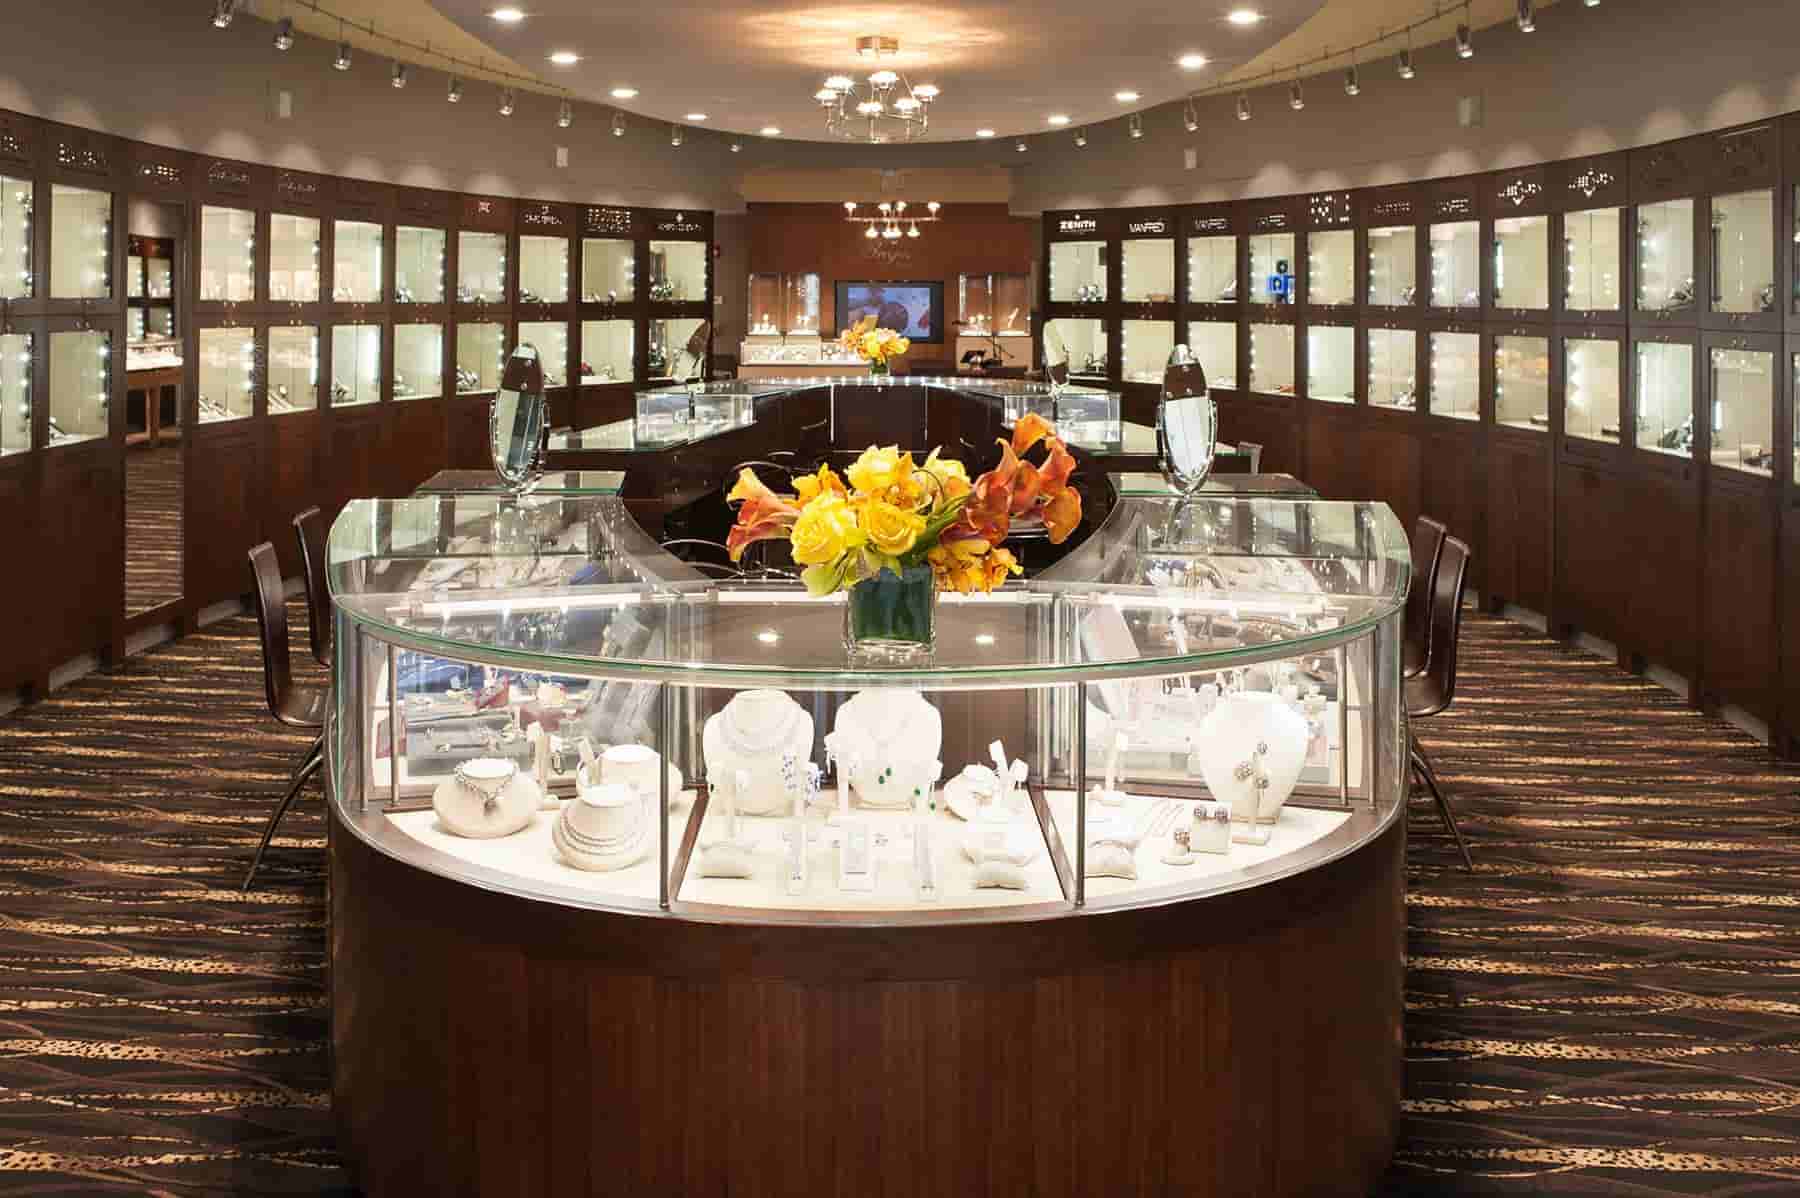 TRUE LUXURY - Manfredi Jewels of Greenwich has created a haven for luxury shoppers.